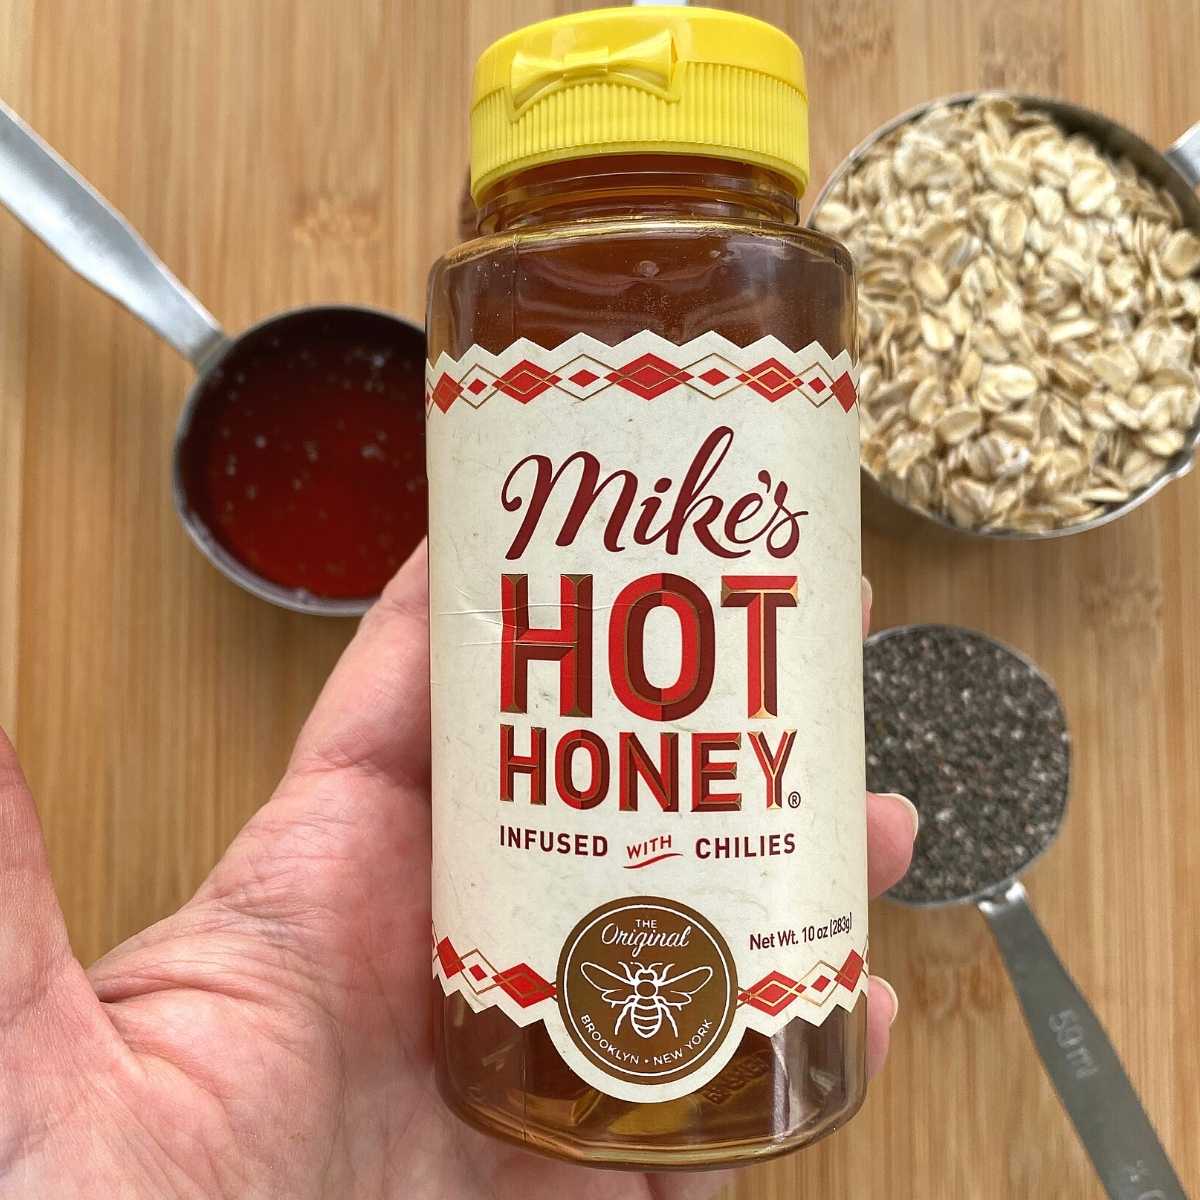 Hand holding a bottle of Mike's Hot Honey.